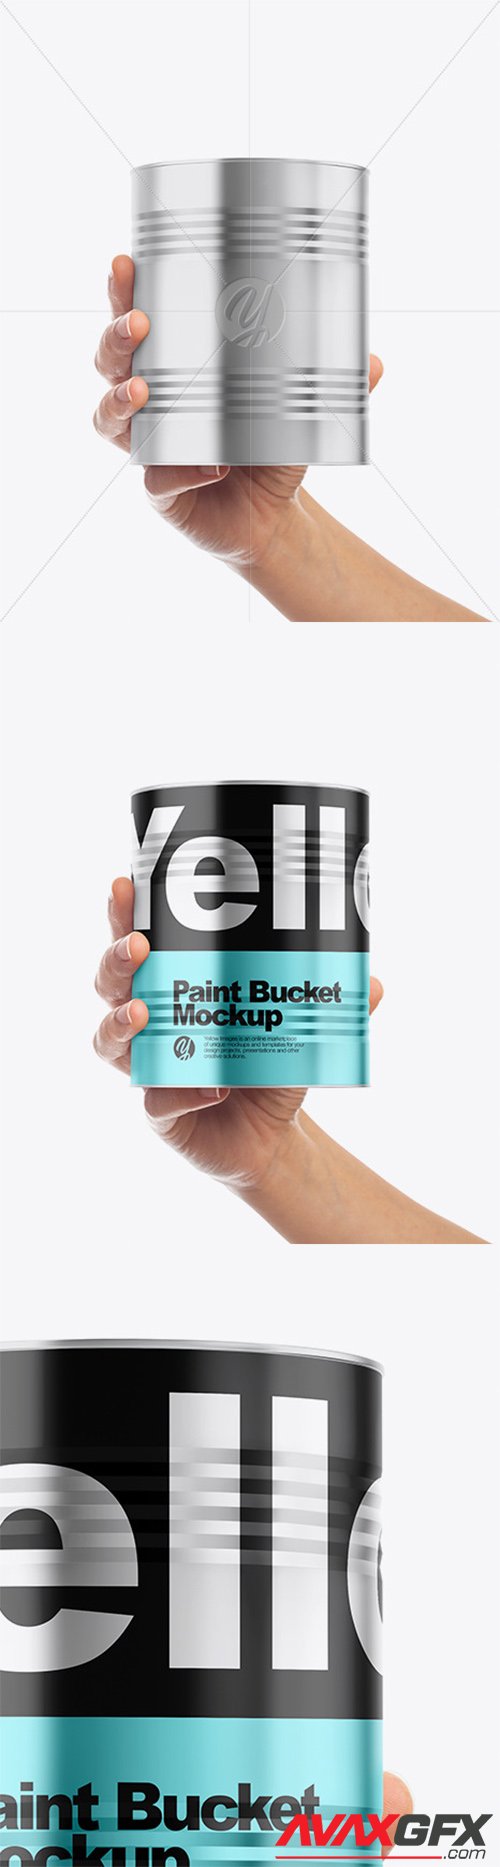 Download Metallic Paint Bucket In Hand Mockup 60678 Avaxgfx All Downloads That You Need In One Place Graphic From Nitroflare Rapidgator Yellowimages Mockups